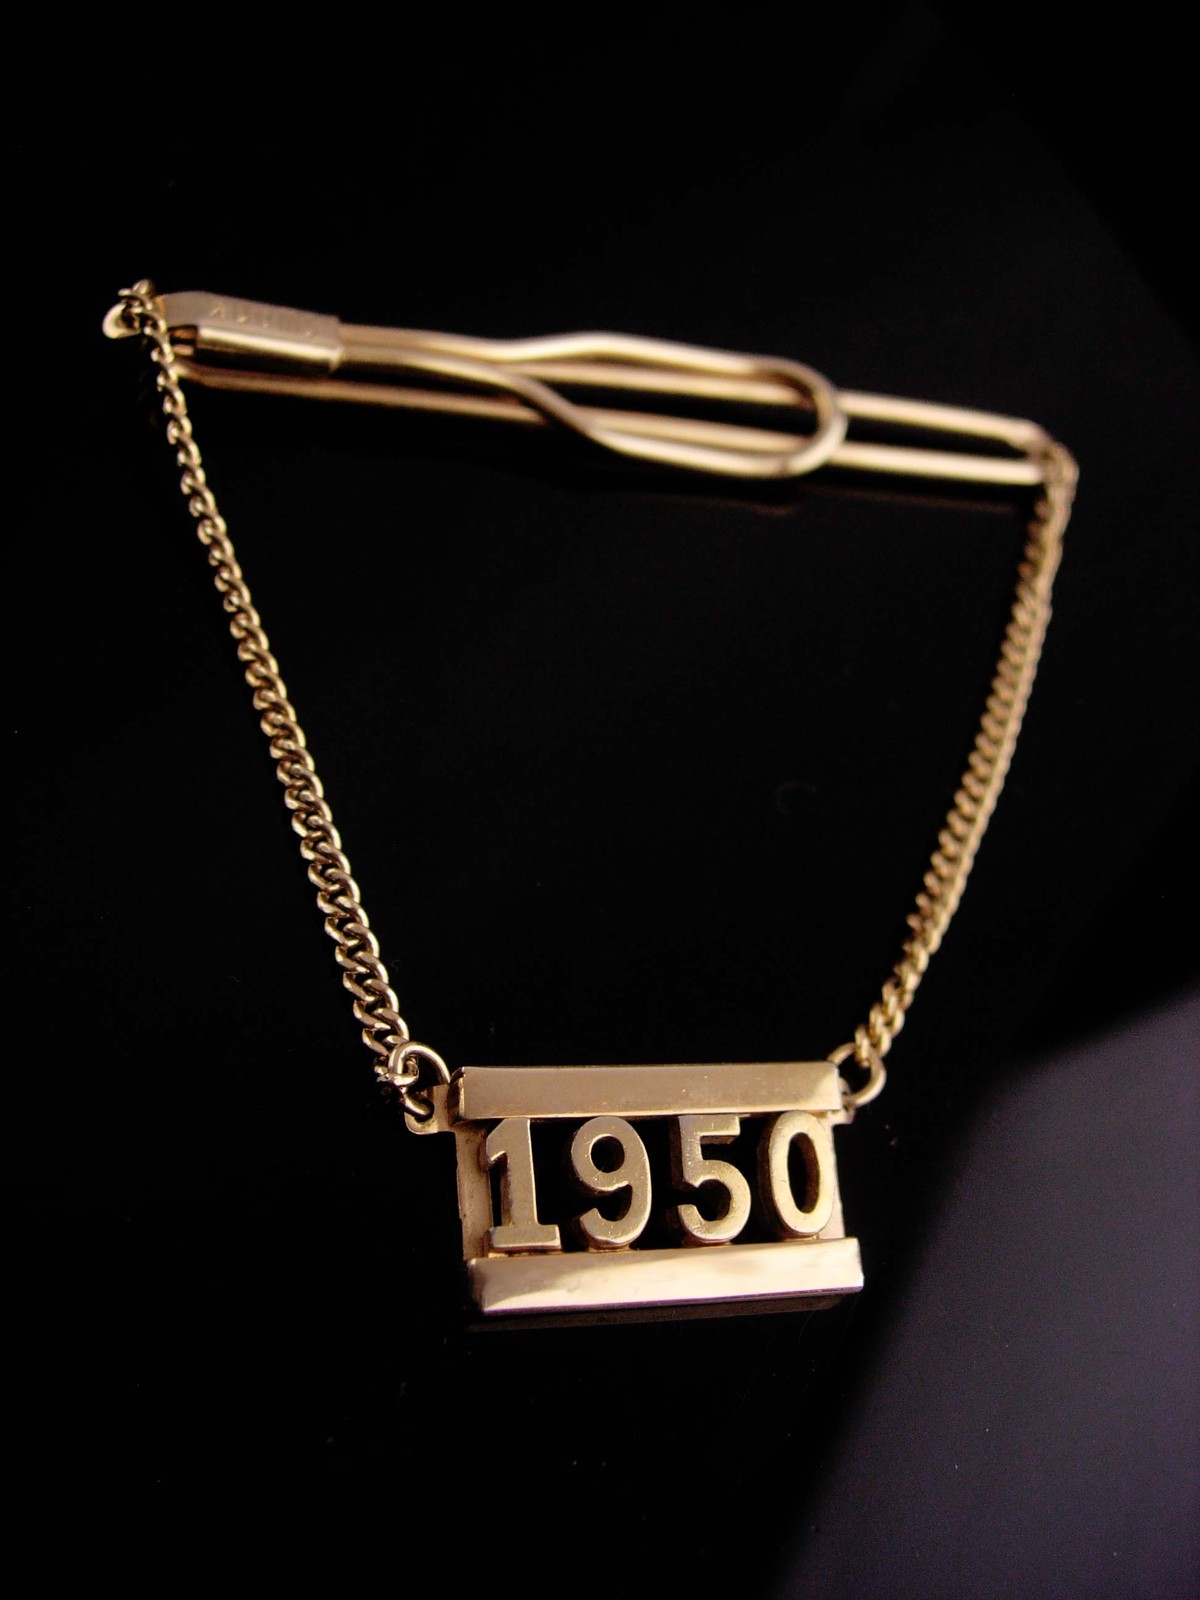 Vintage 1950 Tie Clip - Swag Chain - Vintage gold  swank personalized father of  - $125.00